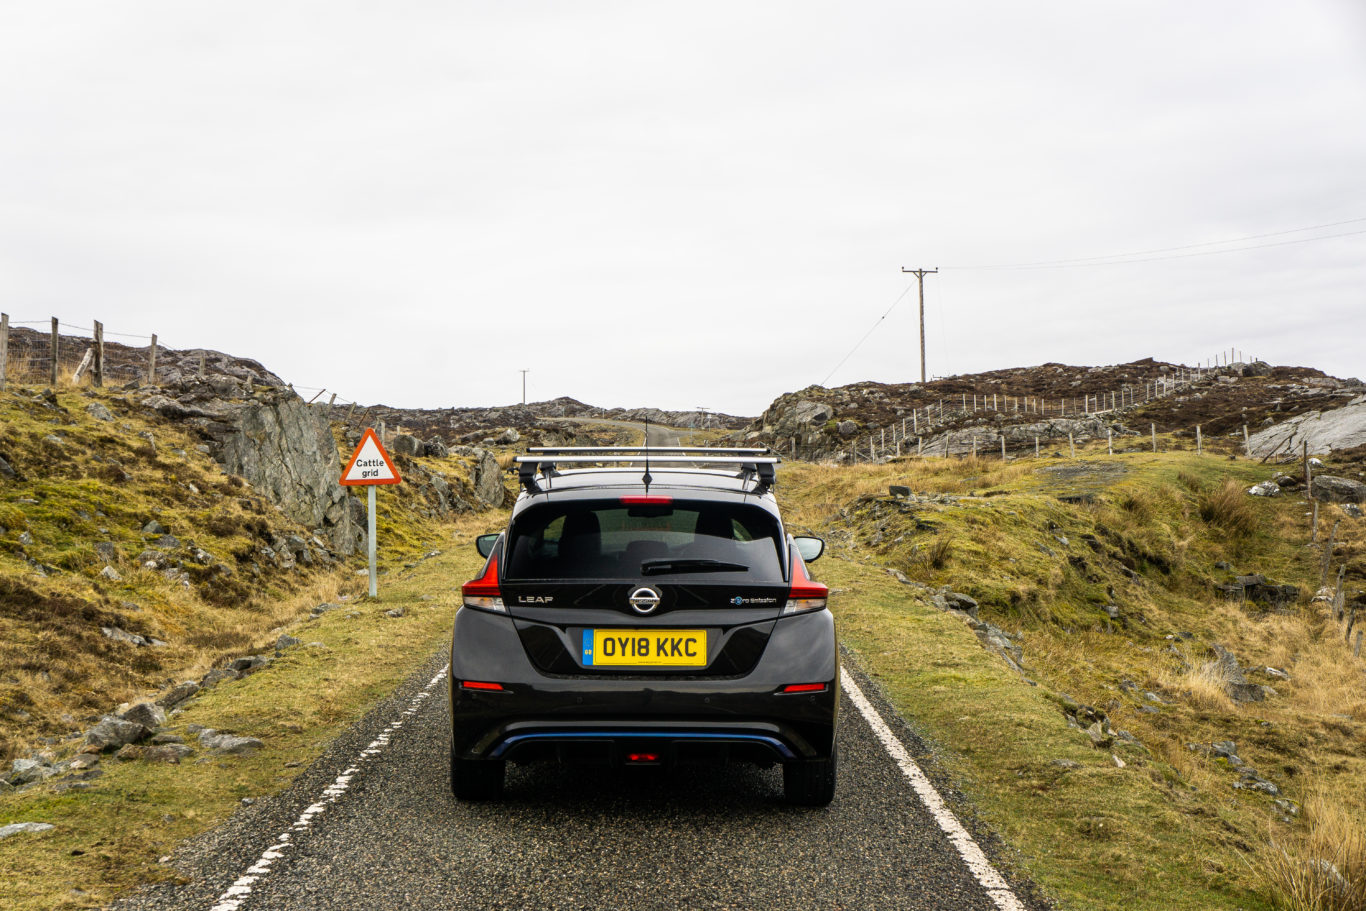 The Leaf did well in the twisting roads of Lewis and Harris